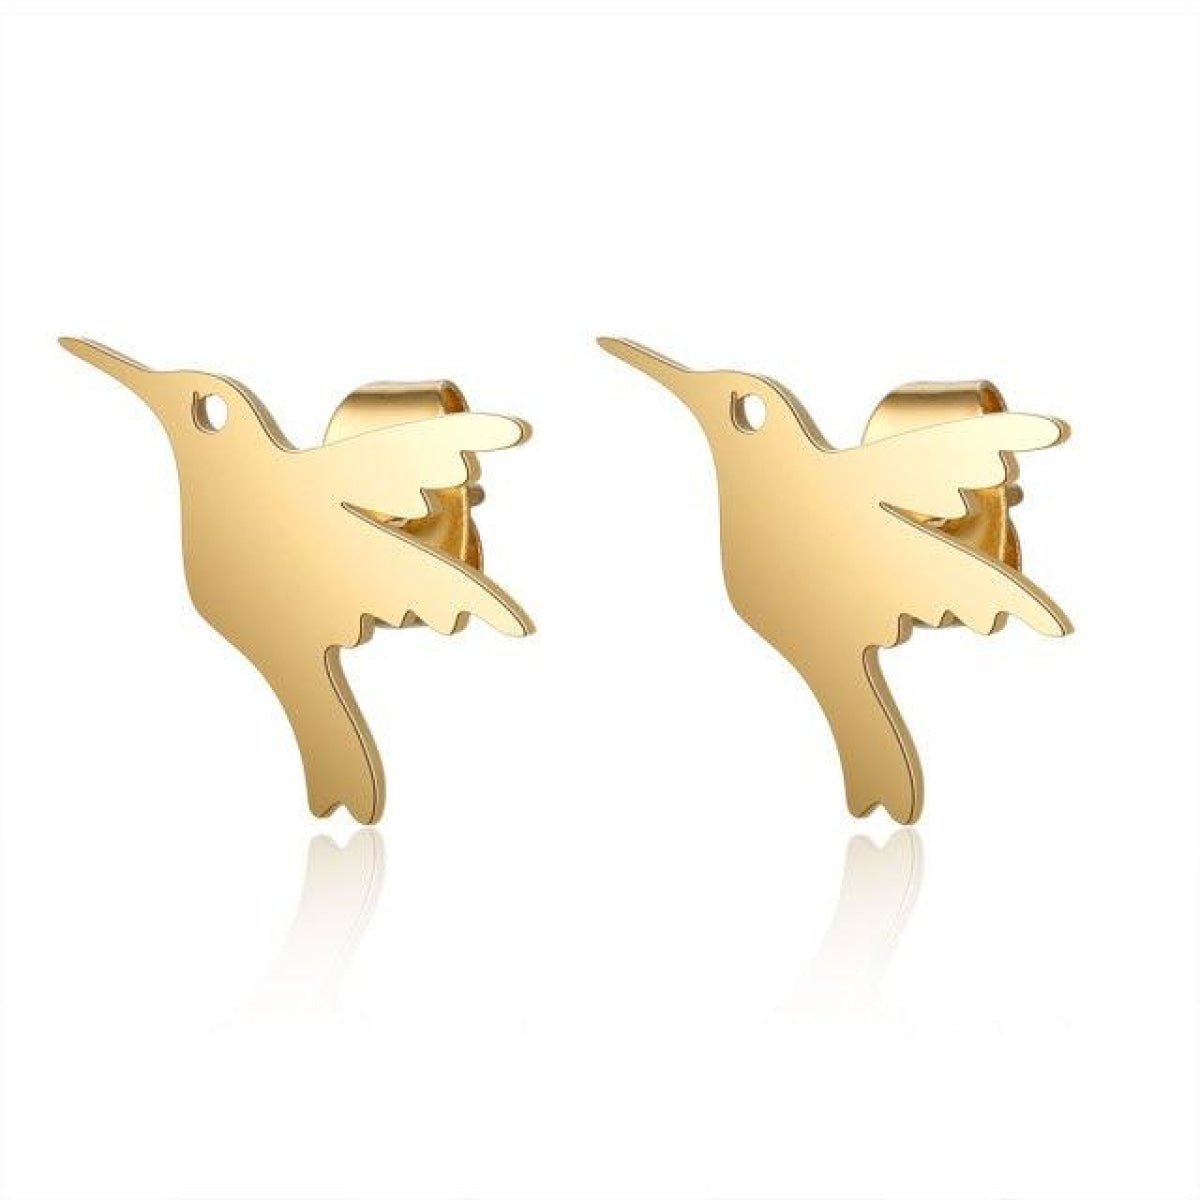 1 Pair 316L Gold Silver Colour Stainless Steel SS Night Owl Humming Bird Swallow Stud Earring Jewellery Gift - Bird 2 - Gold - - Asia Sell